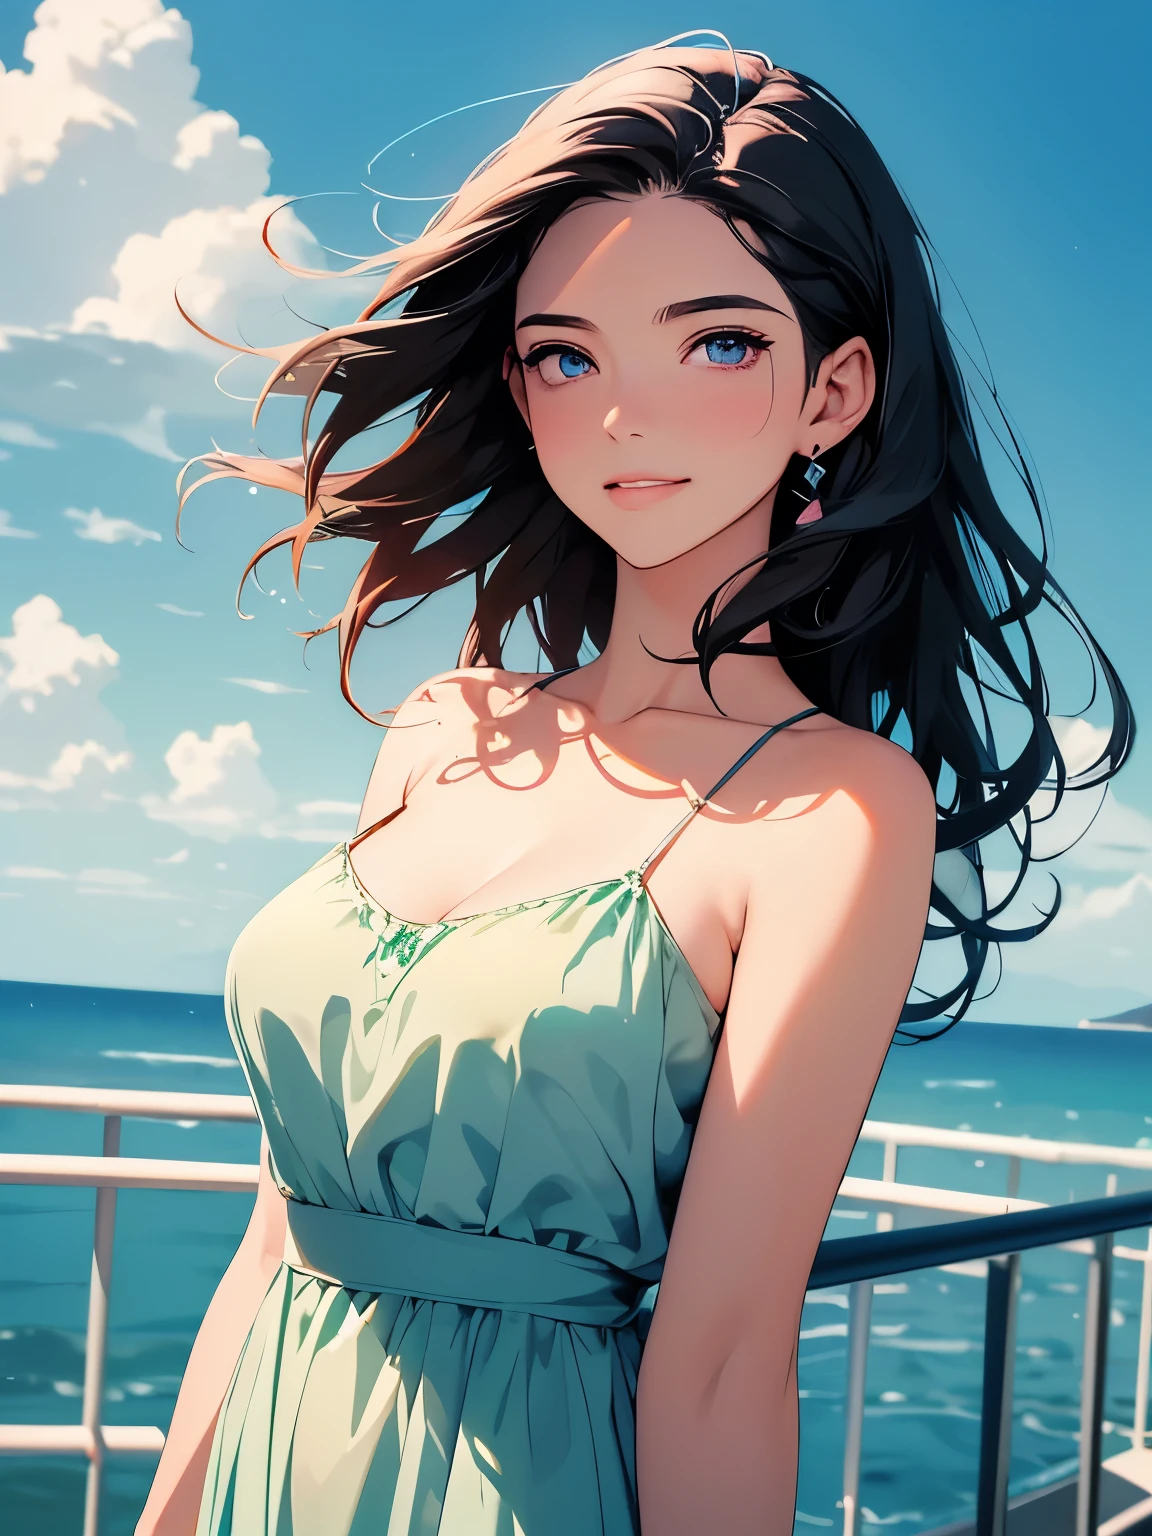 (Masterpiece:1.2, high quality), (pixiv:1.4), (1girl:1.2), (solo:1.2), (smooth:0.8), beautiful woman, (mature), pale white skin, red cheek, blush, (smile:1.2), black hair, side fringes, bangs, wavy hair, (strand braids), hair clips, one eye covered, blue eyes, (detailed eyes), symmetrical eyes, black eyeshadow, glossy lips, pale pink lips, parted lips, symmetric face, (looking away), looking sideways, mole on chin, plunging neckline, green transparent dress, flowery dress, shoulder strap dress, luxurious, slender arms, (beautiful round breasts:1.2), derailed cleavage, beautiful portrait, professional photography, best quality, (absurdres:1.2), ultra-detailed, ultra HD, 1080, 4k, 8k, intrinsic details, shiny blue sky, aesthetic outdoors,  sky background, view from below, wind blowing hair, vivid colors, dynamic lighting